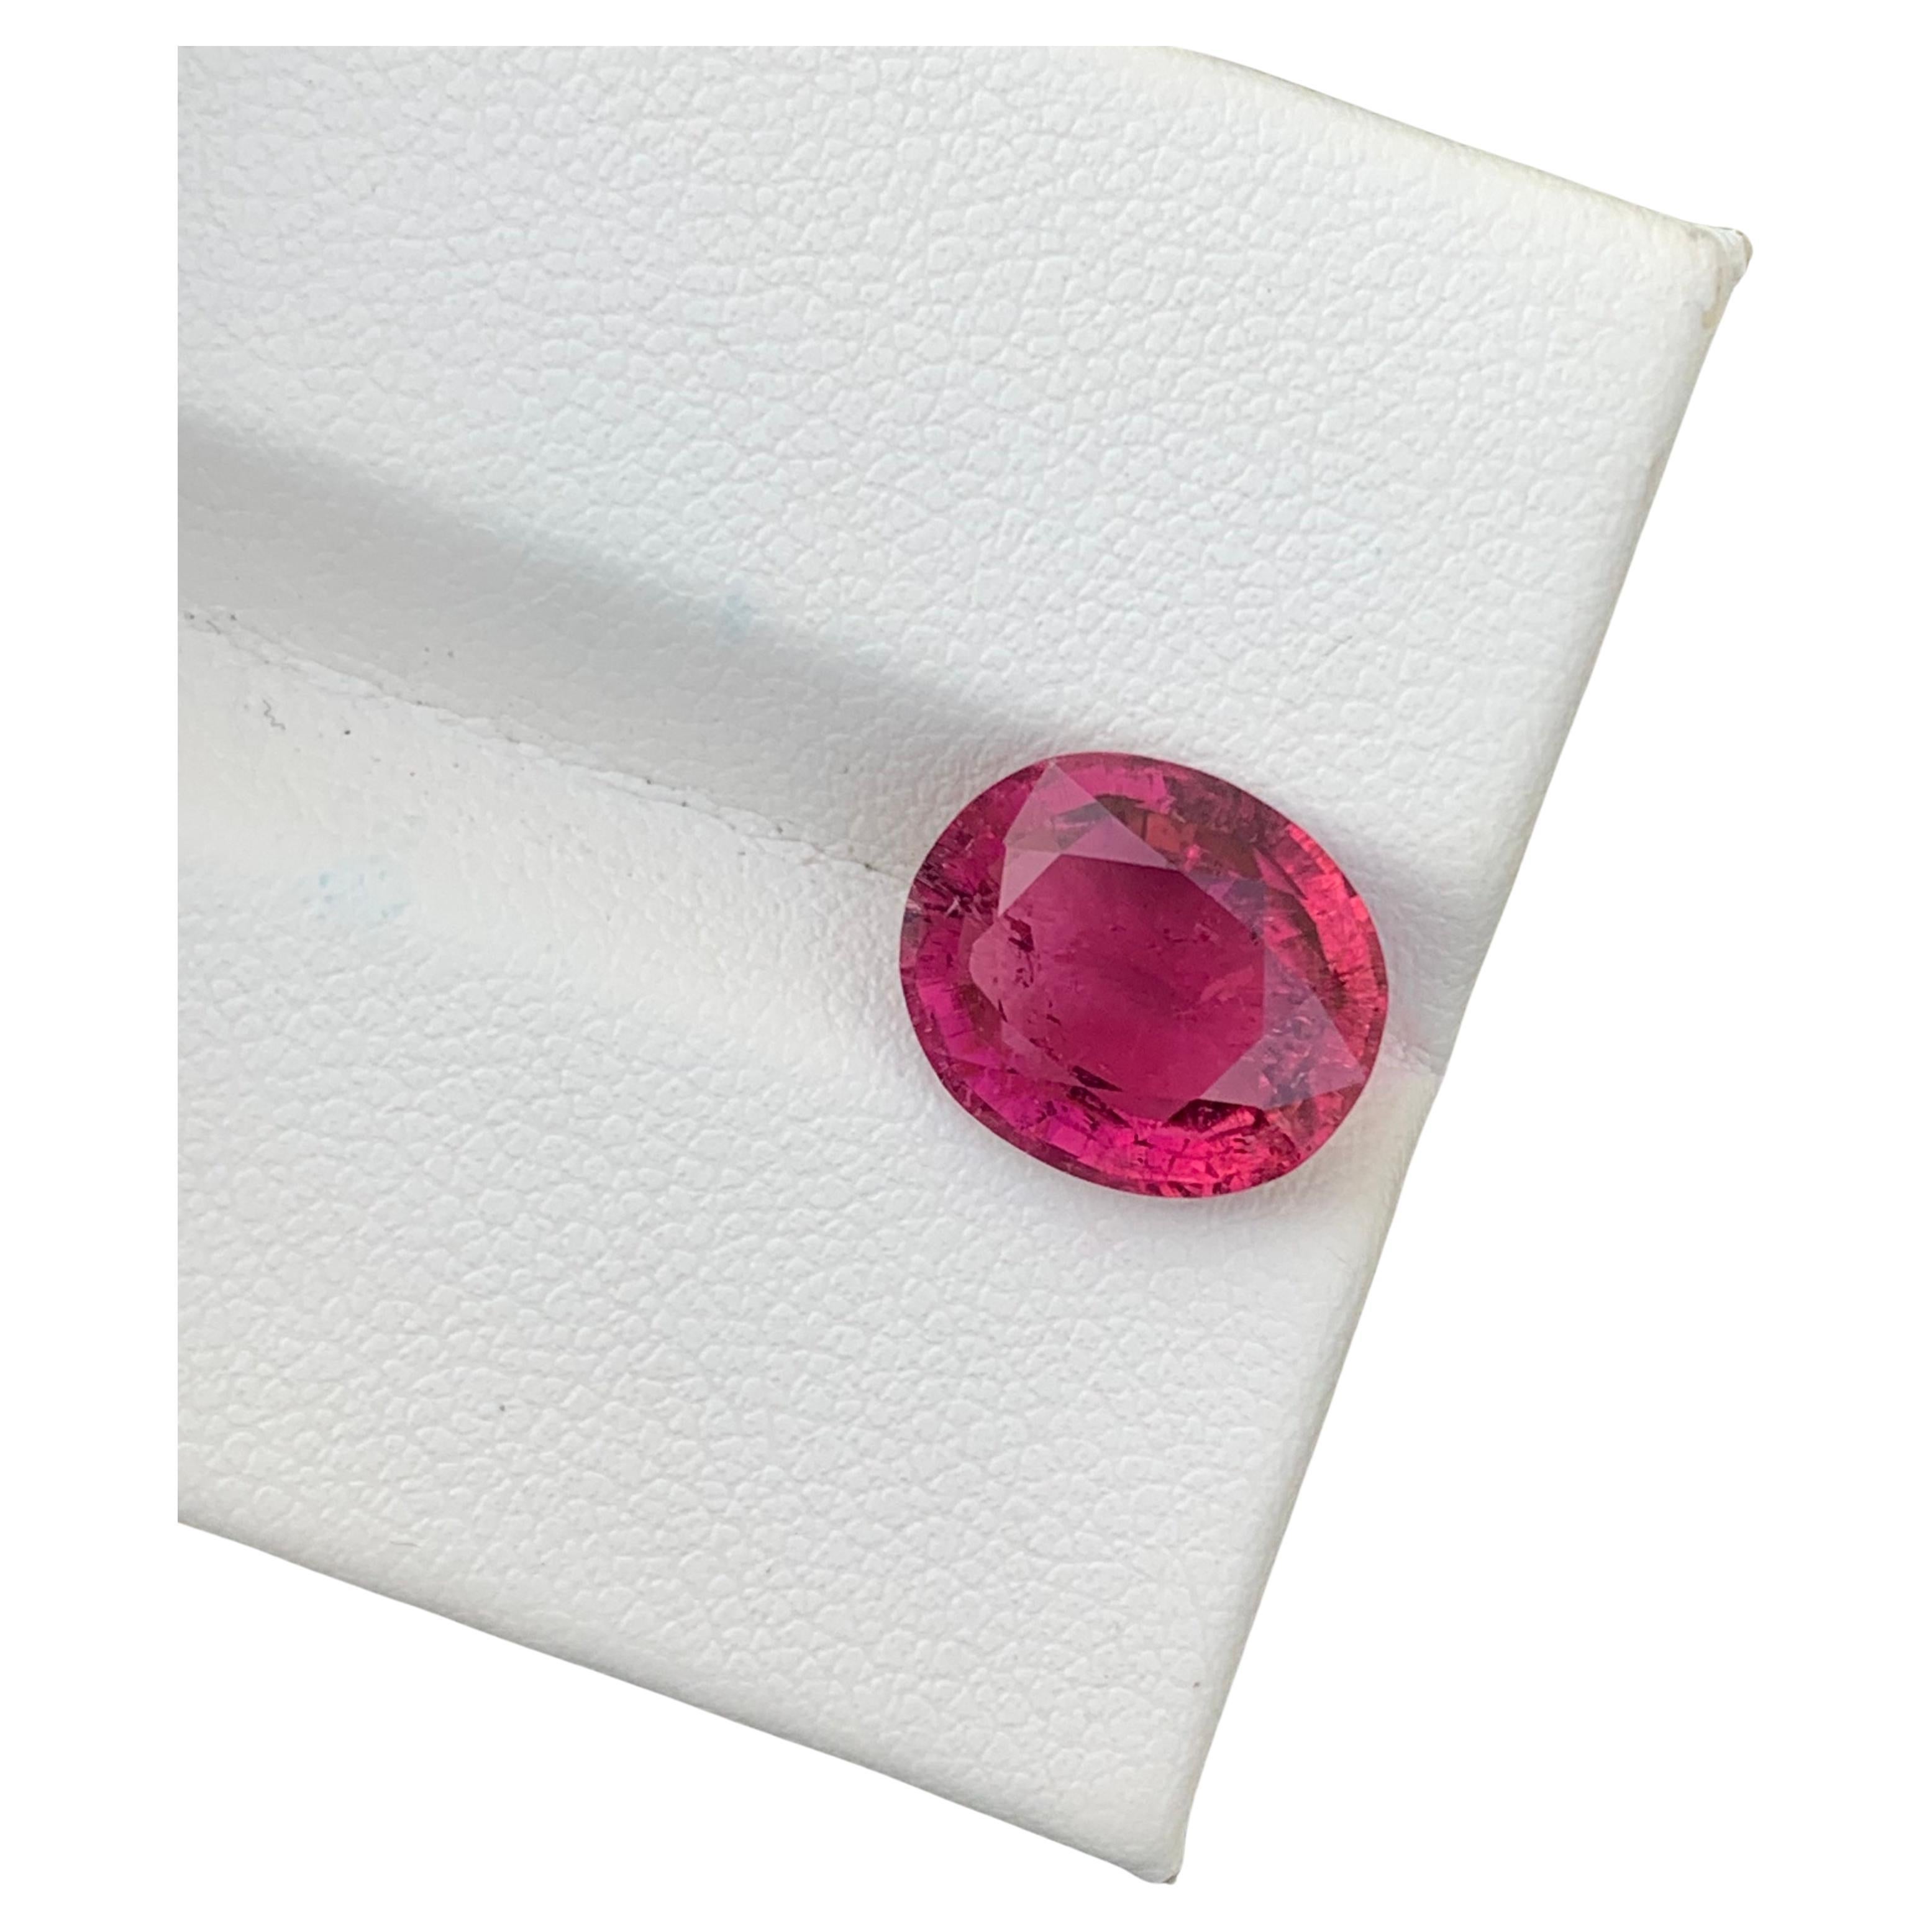 Faceted Rubellite Tourmaline 
Weight: 4.70 Carats 
Dimension: 11.7x9.9x5.9 Mm
Origin: Afghanistan 
Color: Pink Red
Shape: Oval
Cut: Cushion 
Treatment: Non
Certficate: On Customer Demand 
.
Rubellite tourmaline is a captivating gemstone renowned for